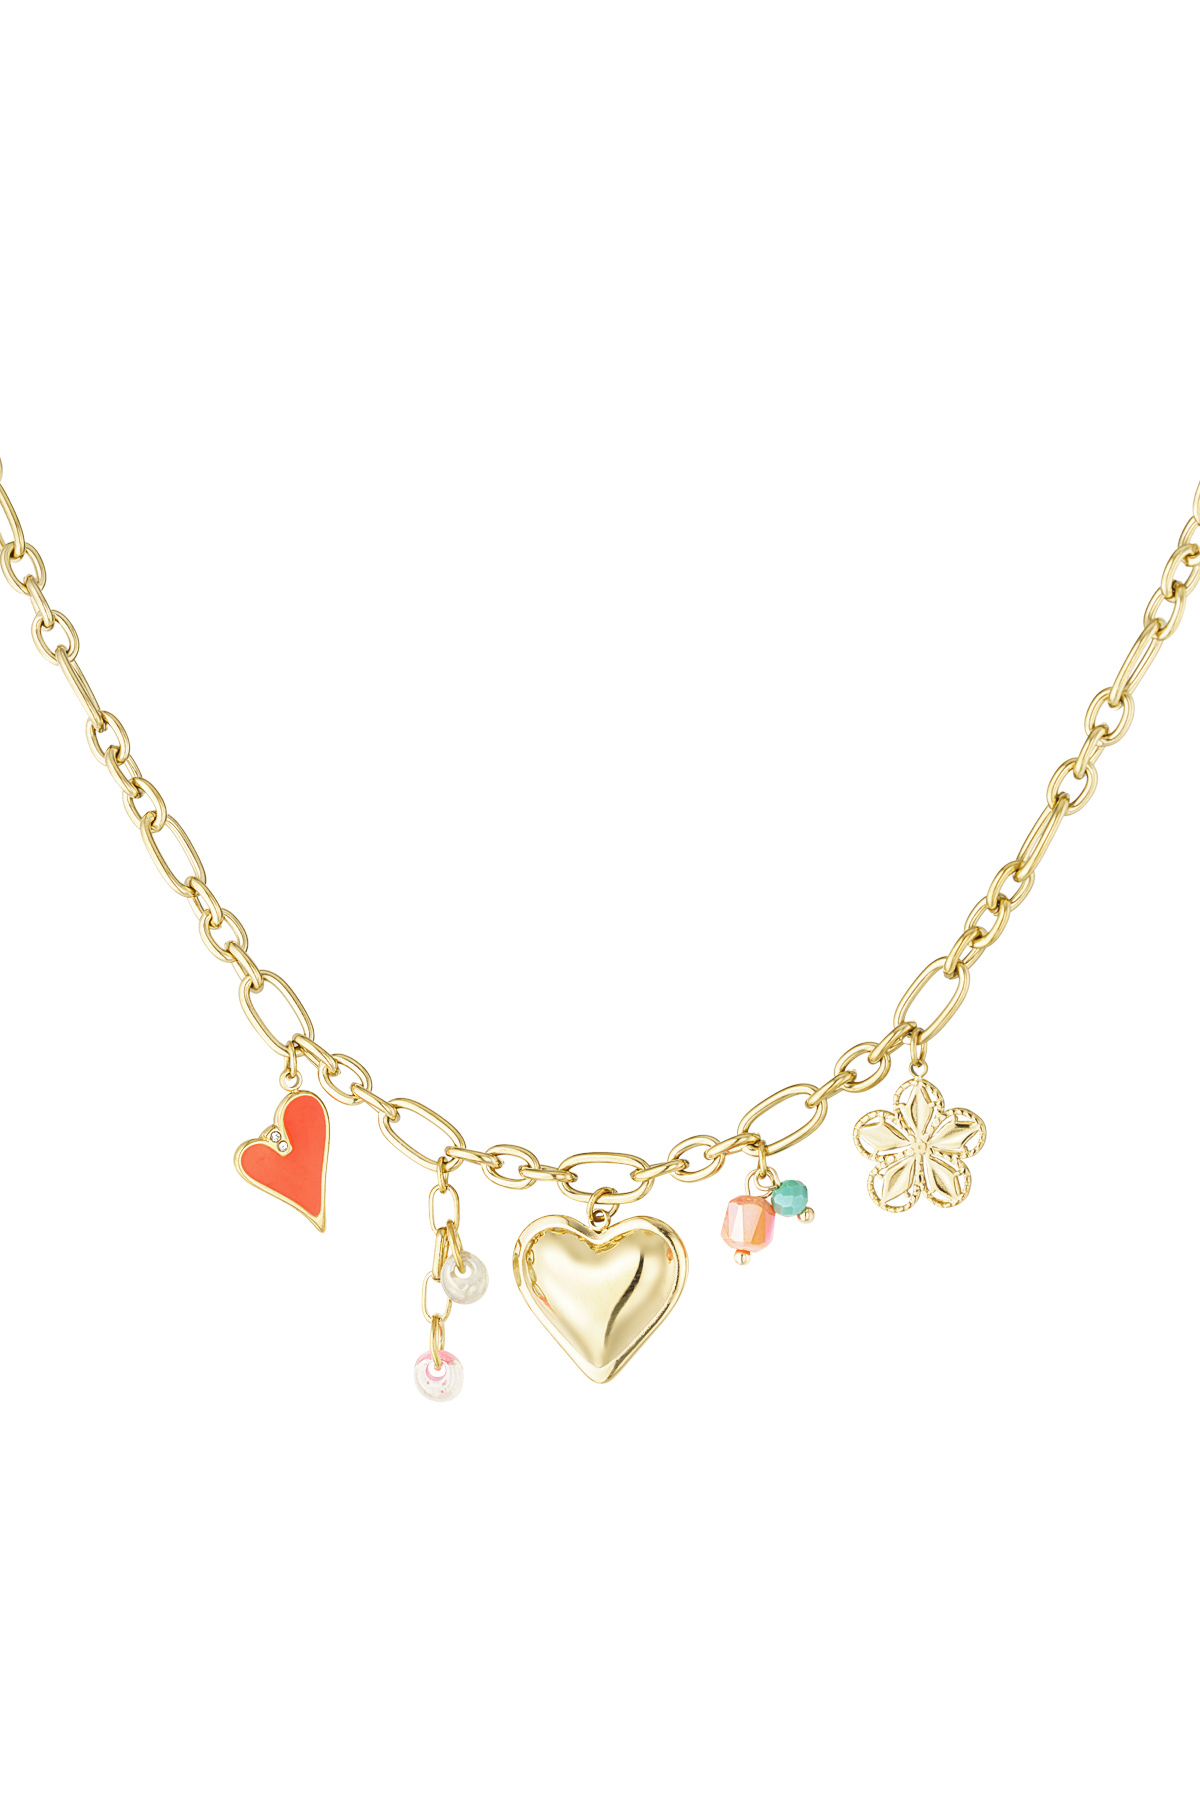 Summer of joy charm necklace - gold